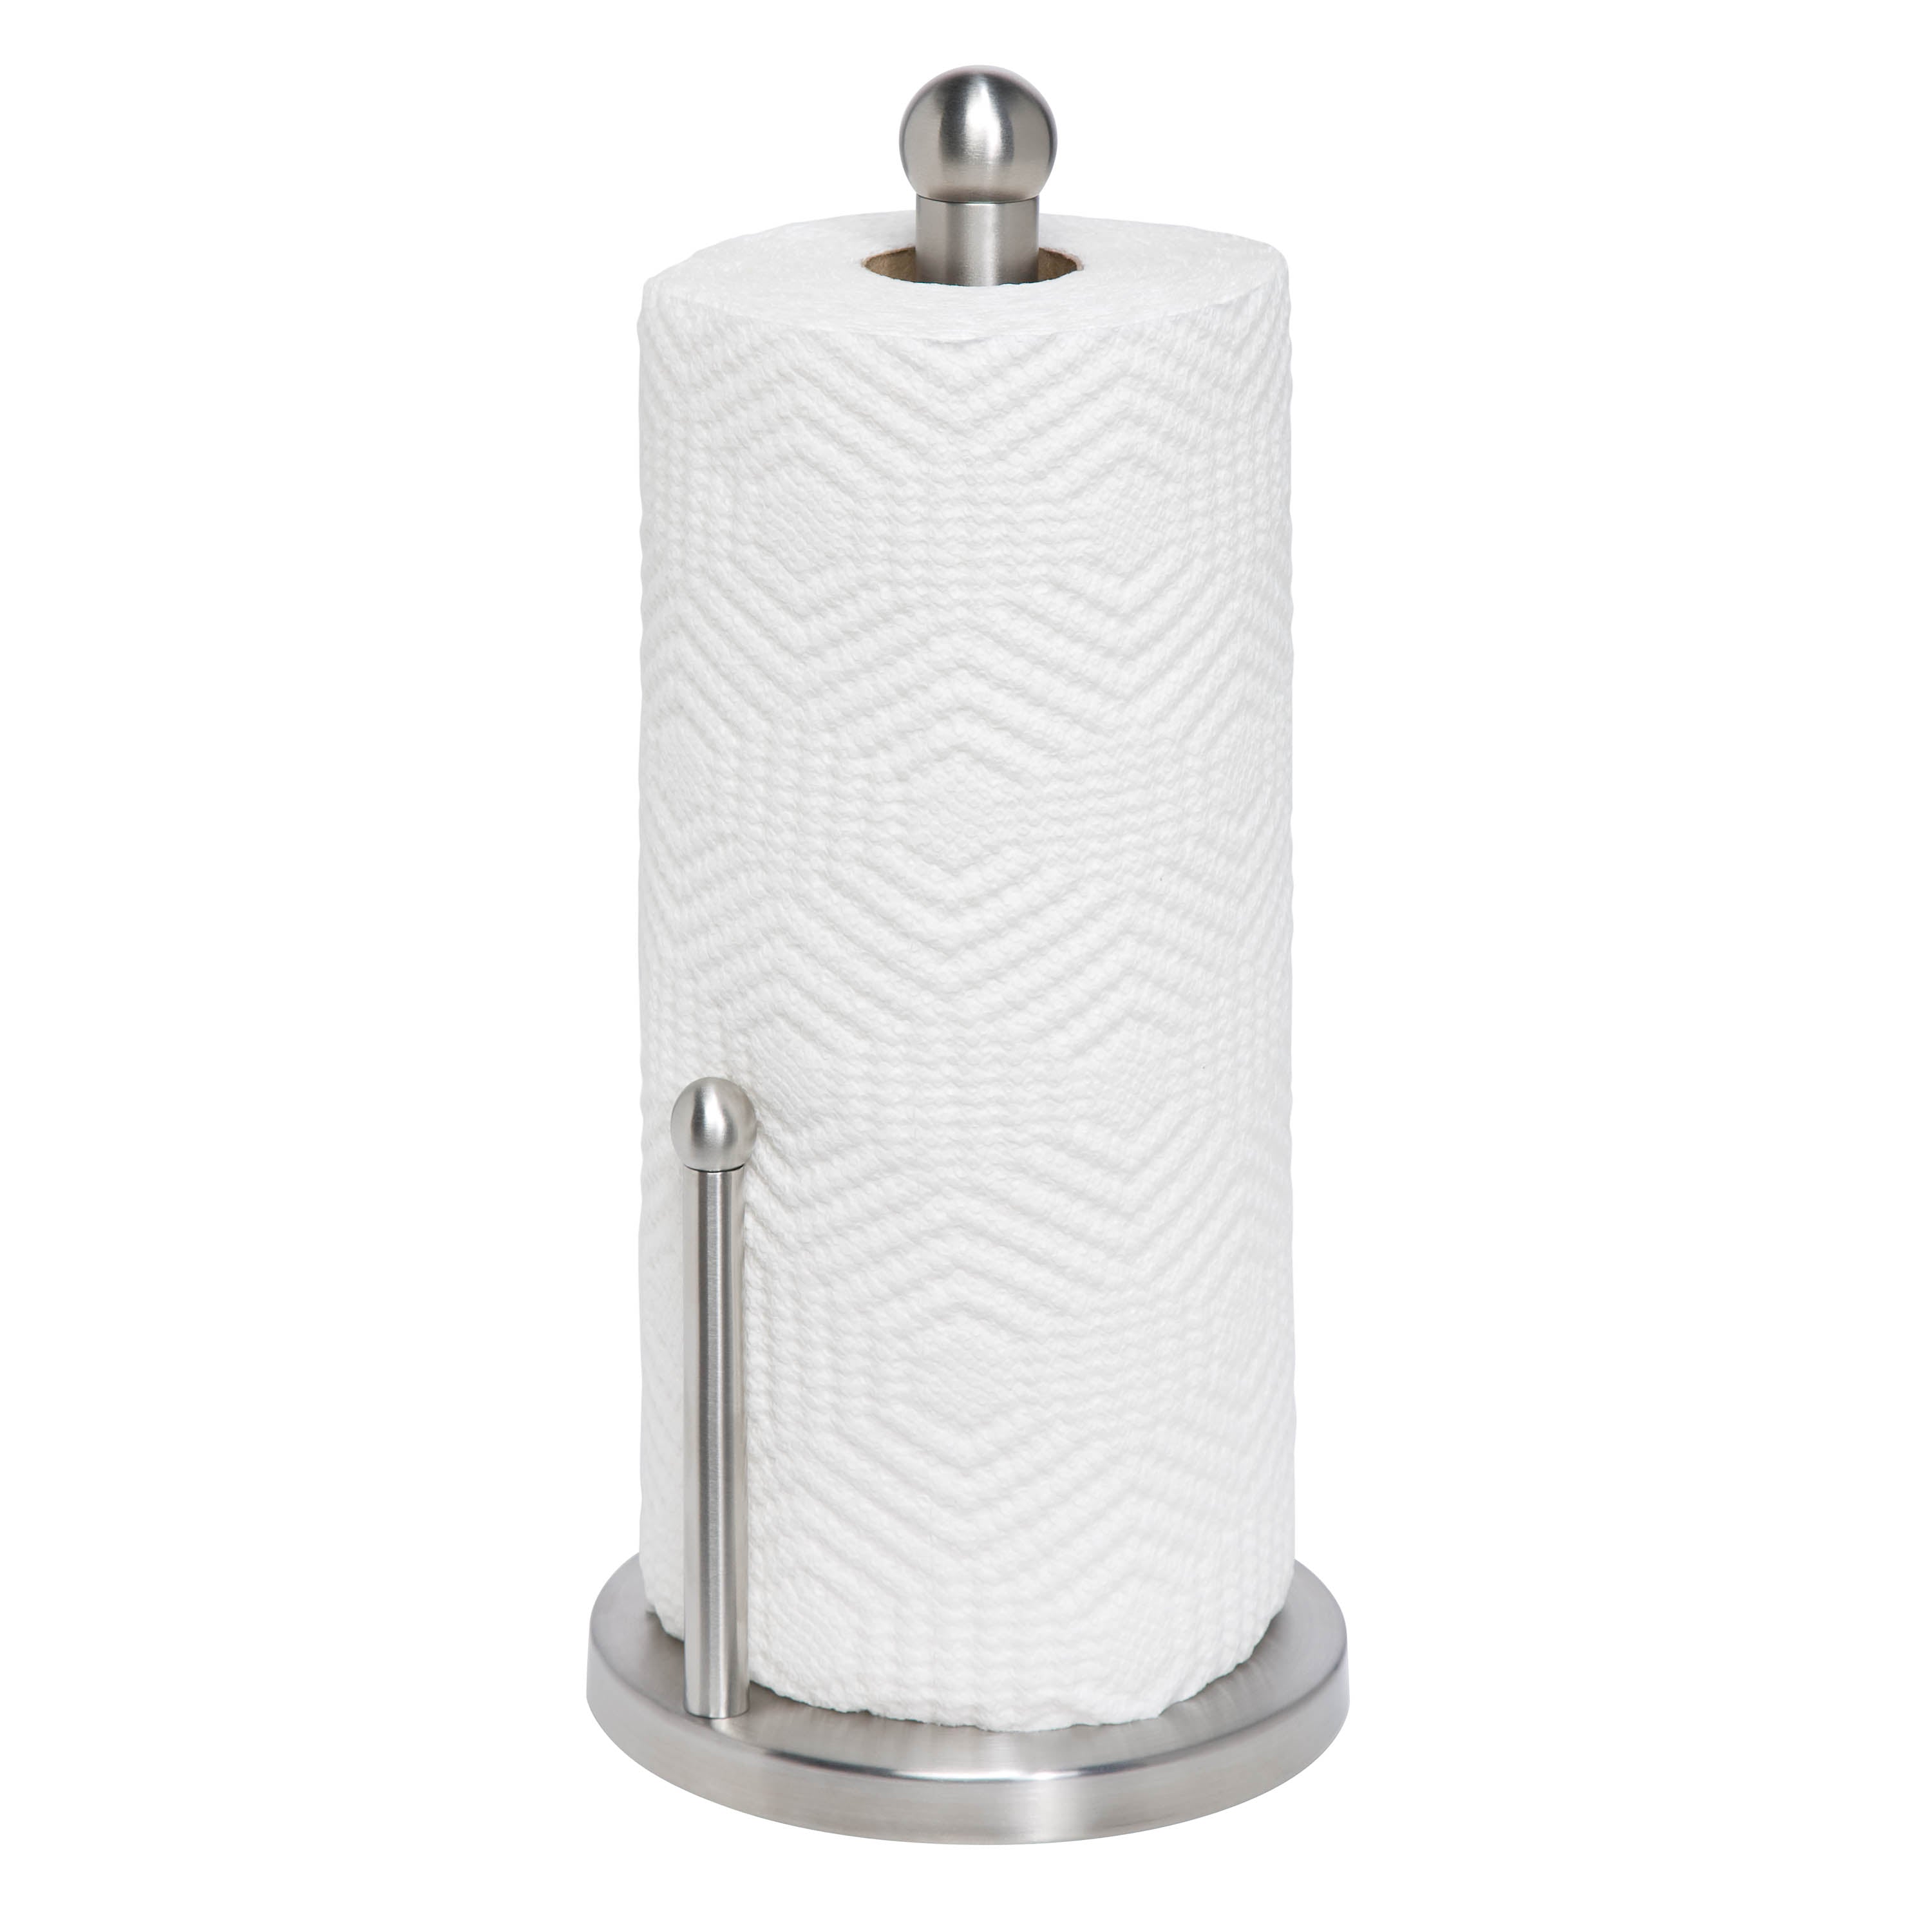 Paper Towel Holder with Suction Cups